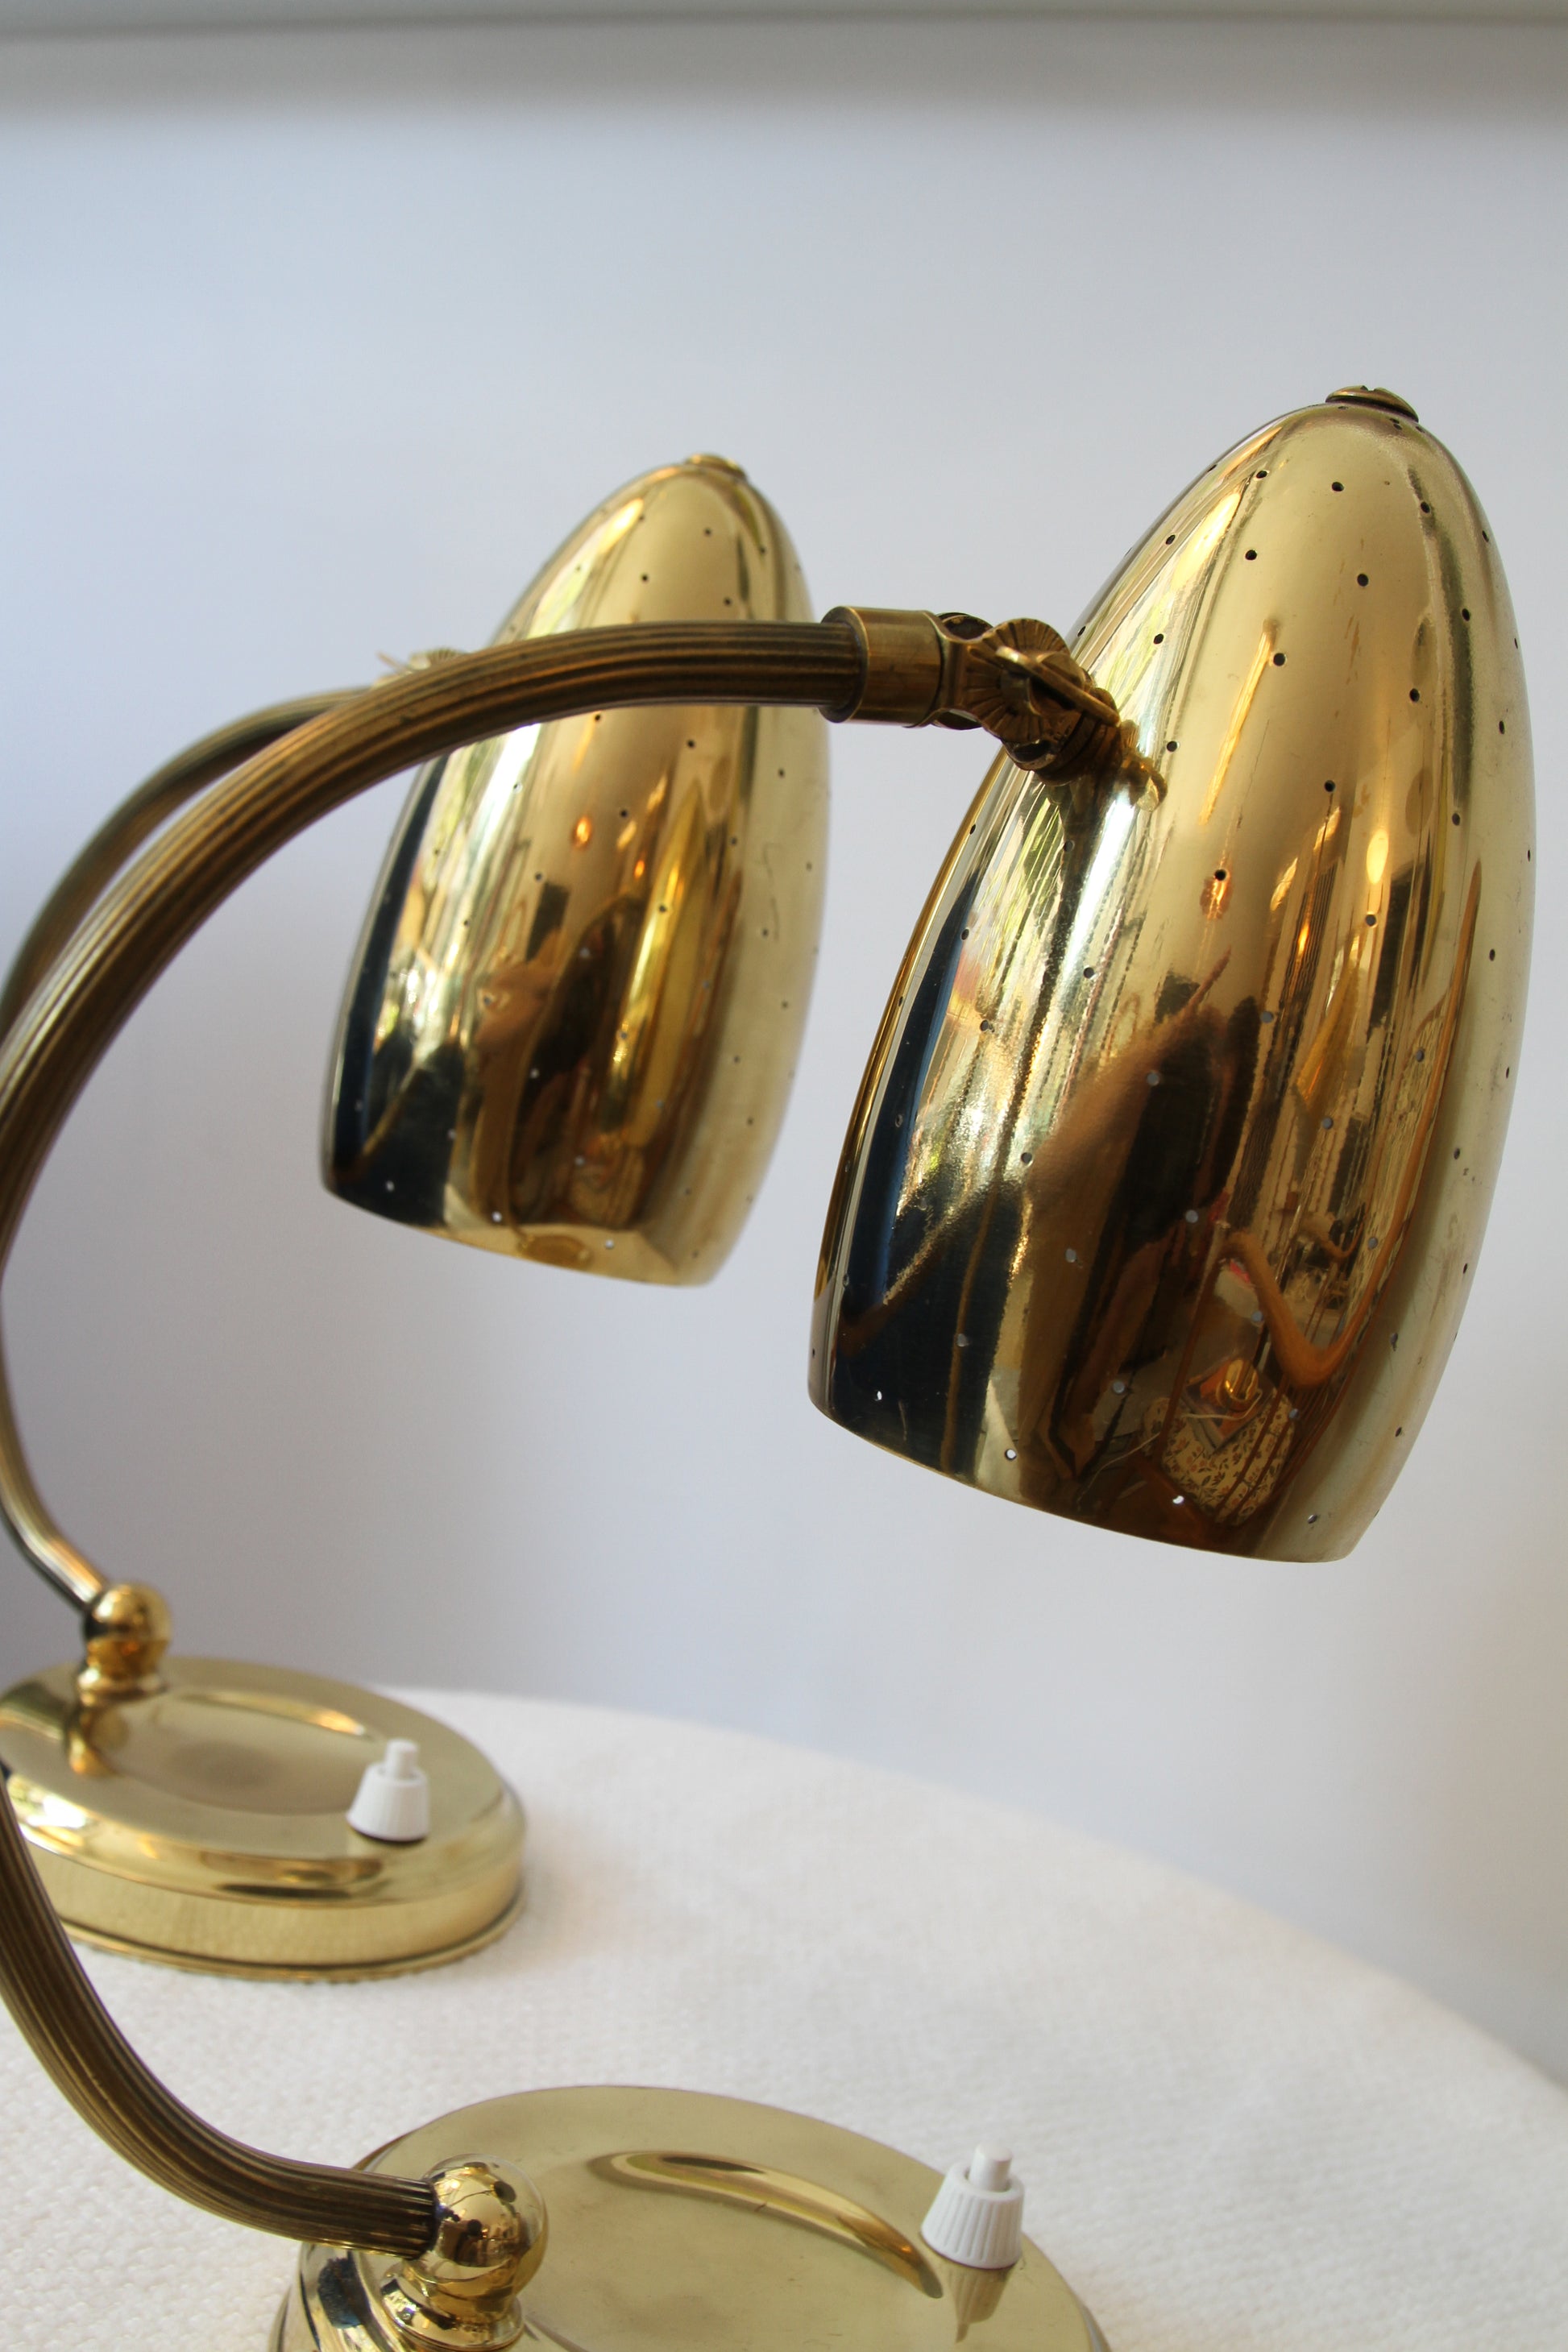 1950s Brass Crow Foot Desk Lamp –Vintageinfo – All About Vintage